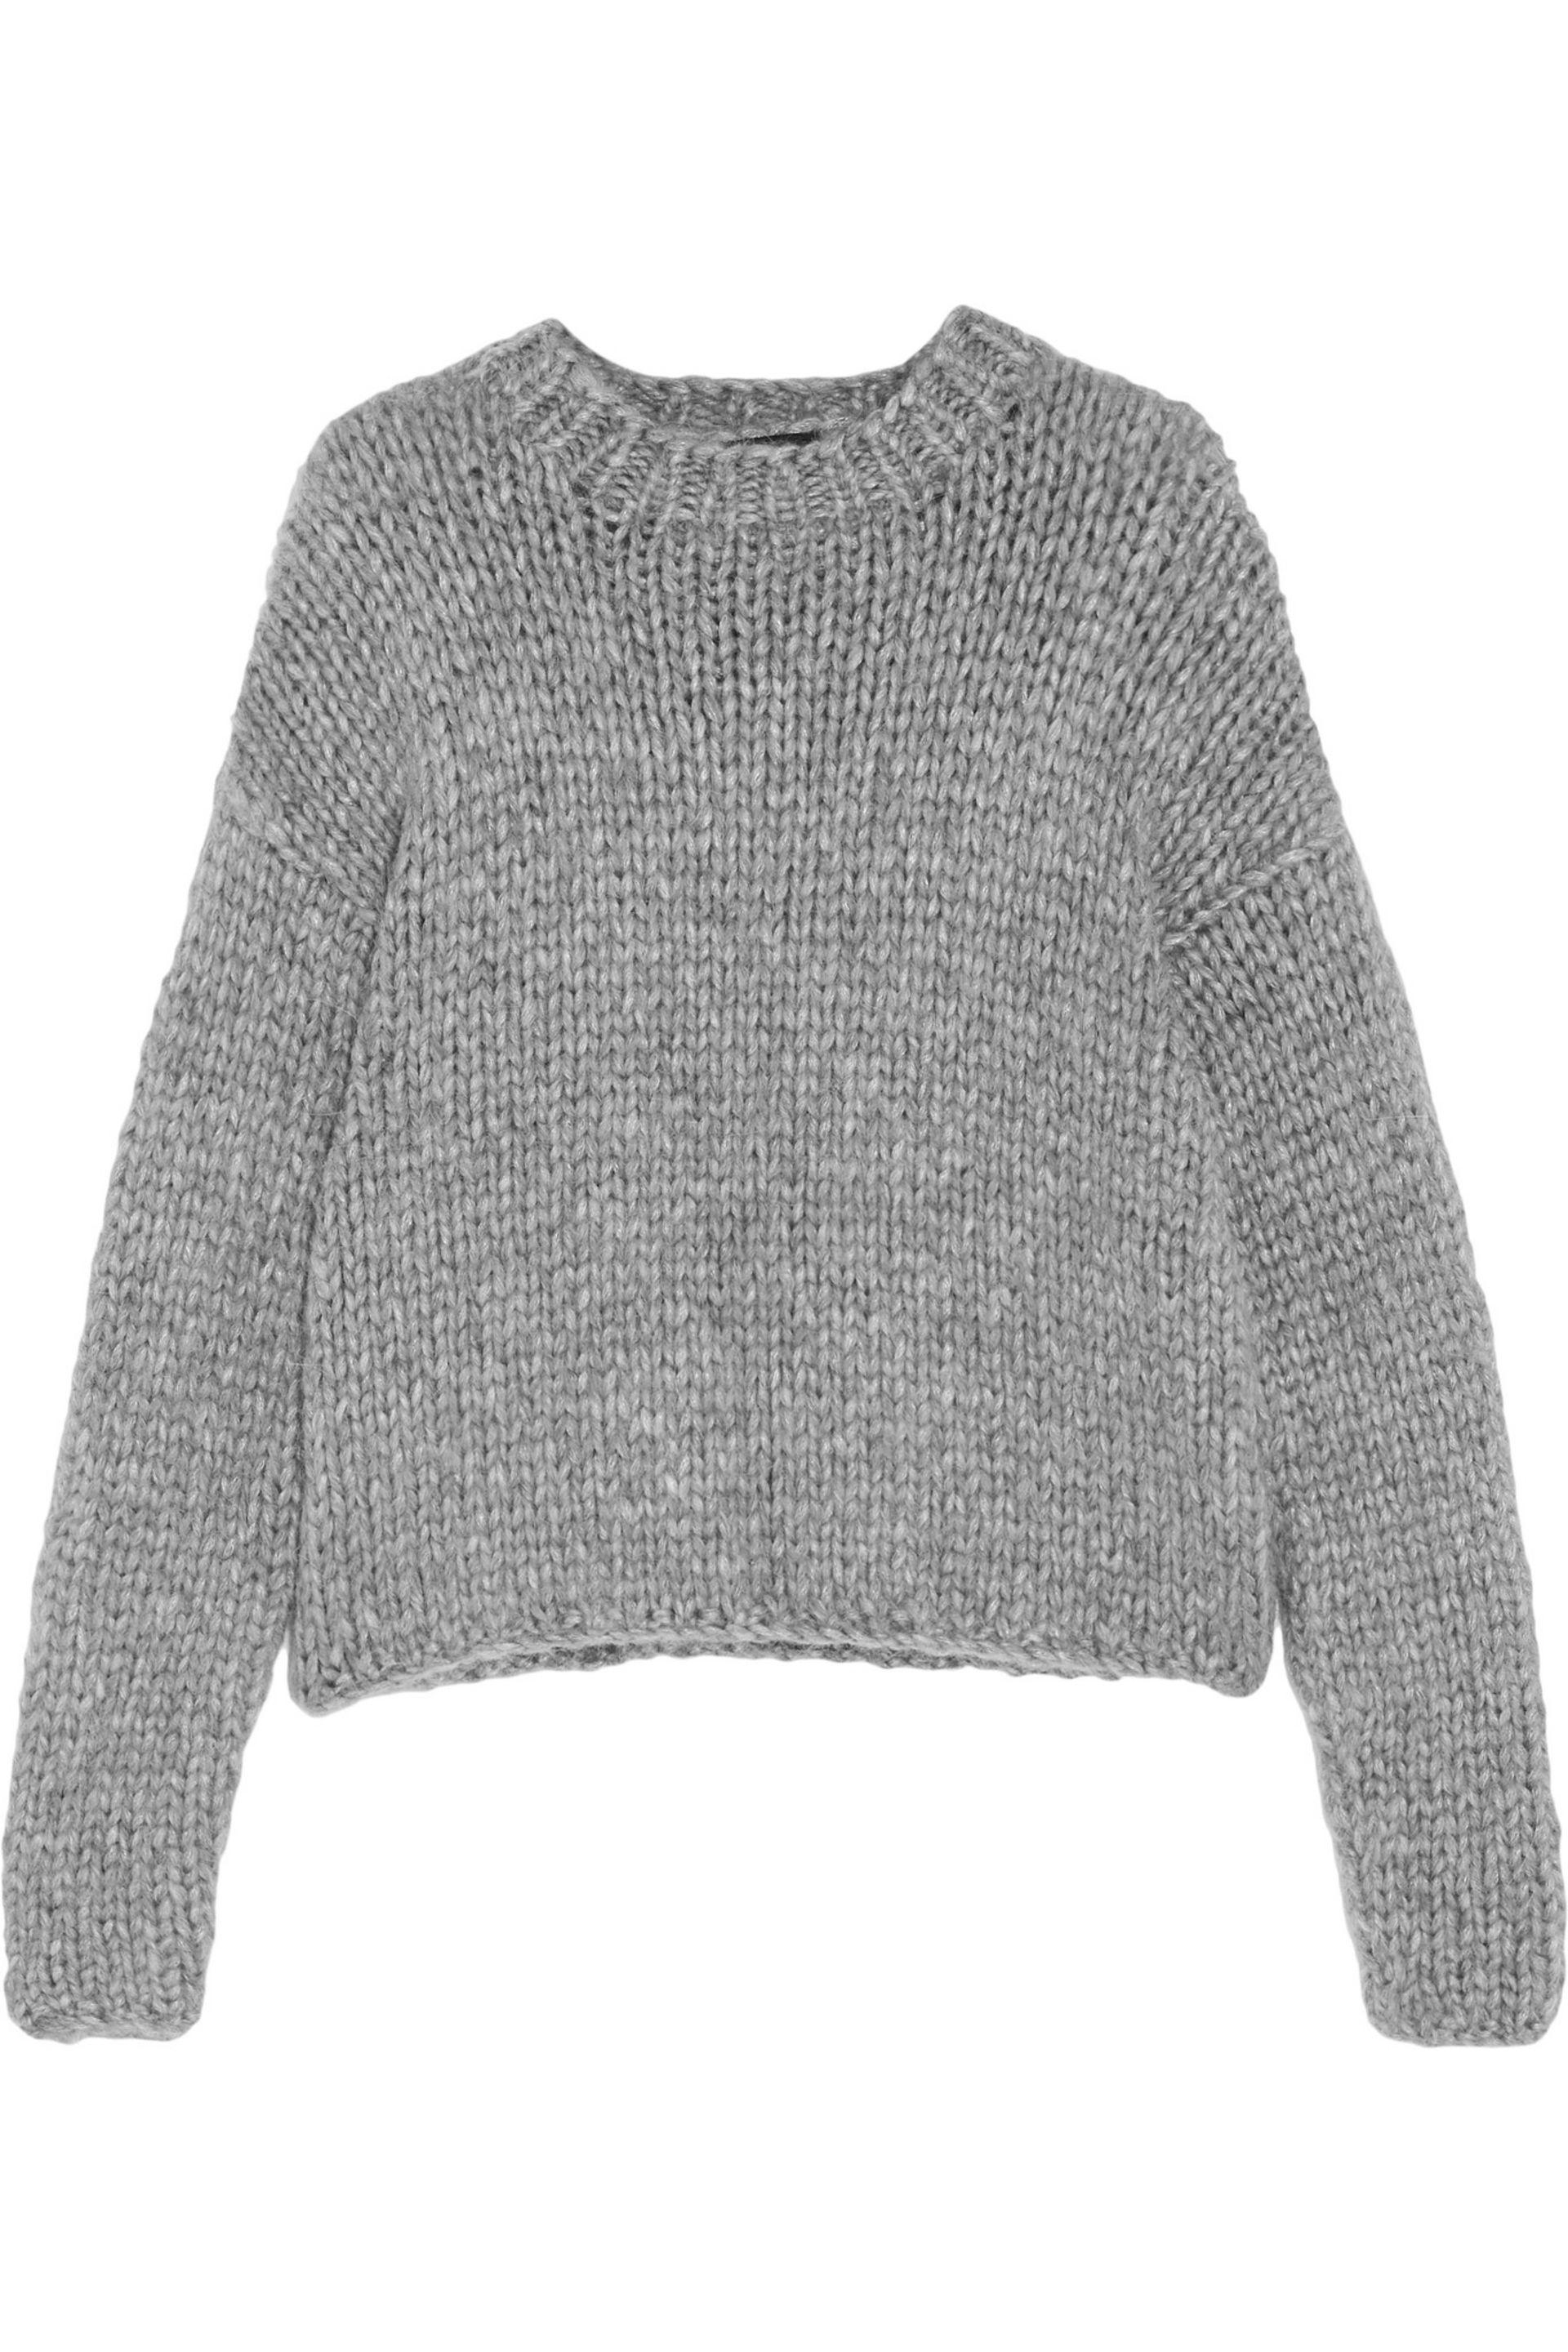 Line Wool Daphne Chunky-knit Sweater in Gray - Lyst